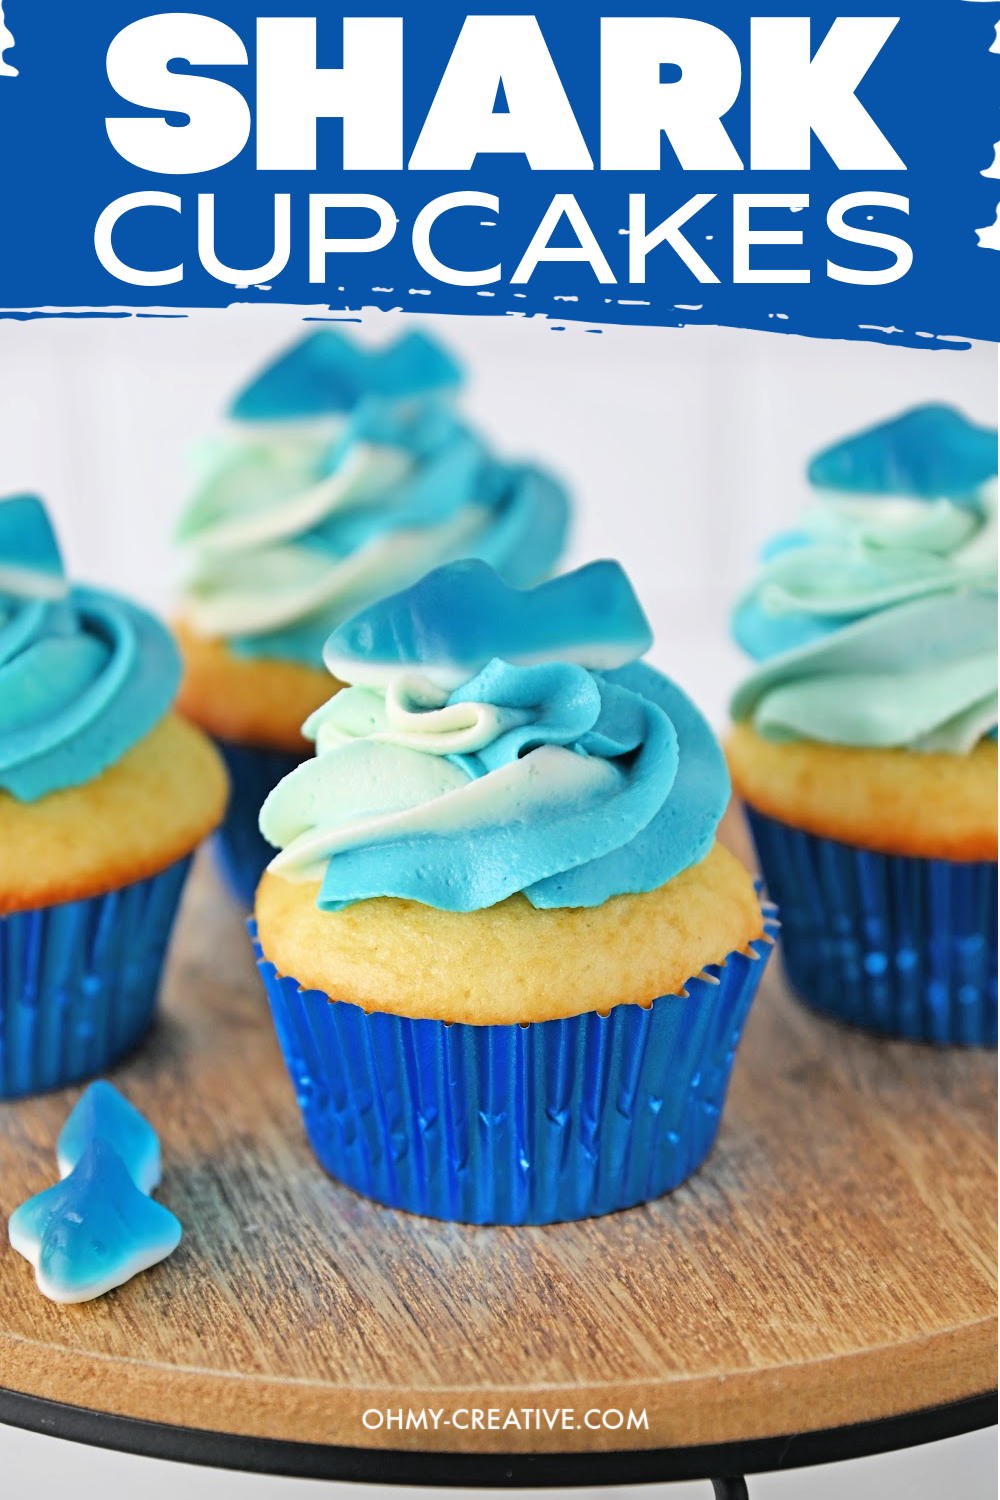 Pinterest image of shark cupcakes using blue ombre icing and a gummy shark on top.